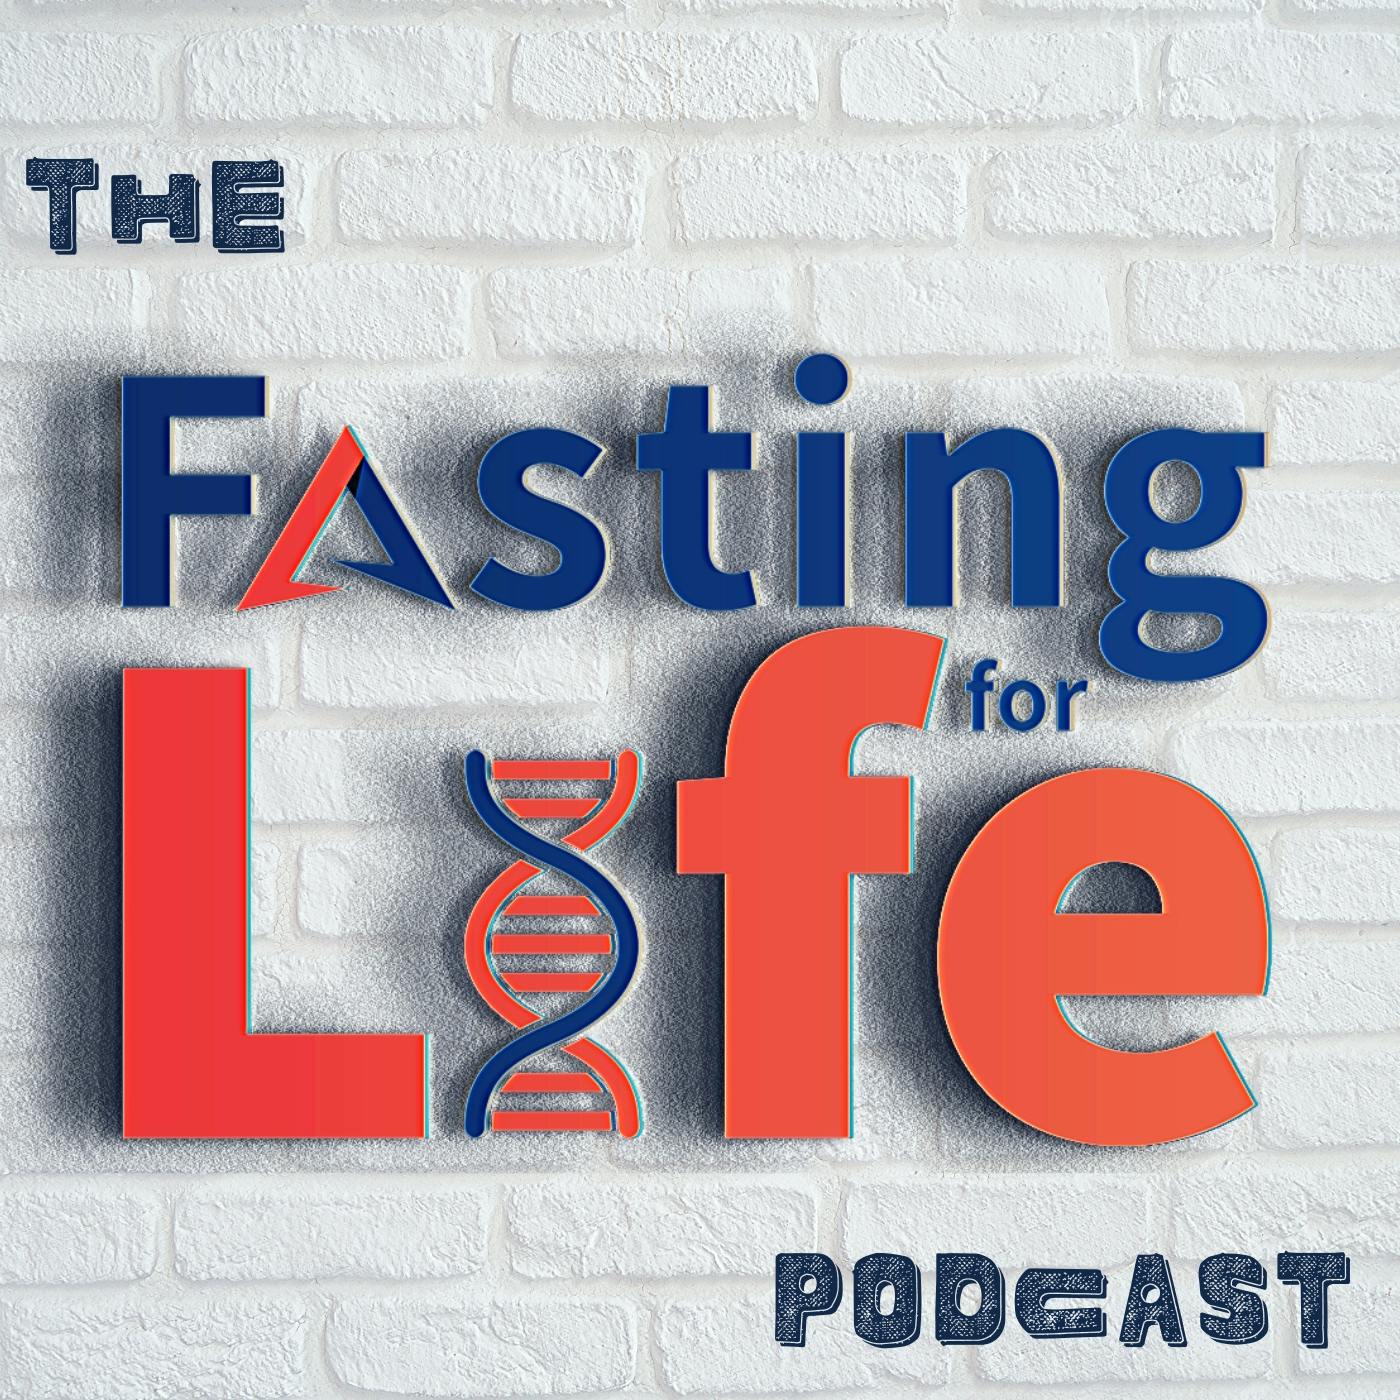 Ep. 178 - Intermittent Fasting & Protein Pacing vs. Caloric Restriction | Improving Visceral Fat, Blood Pressure, & Waist Circumference with Nutrition, 5:2 Diet, & Alternate Day Fasting | Why Decreasi